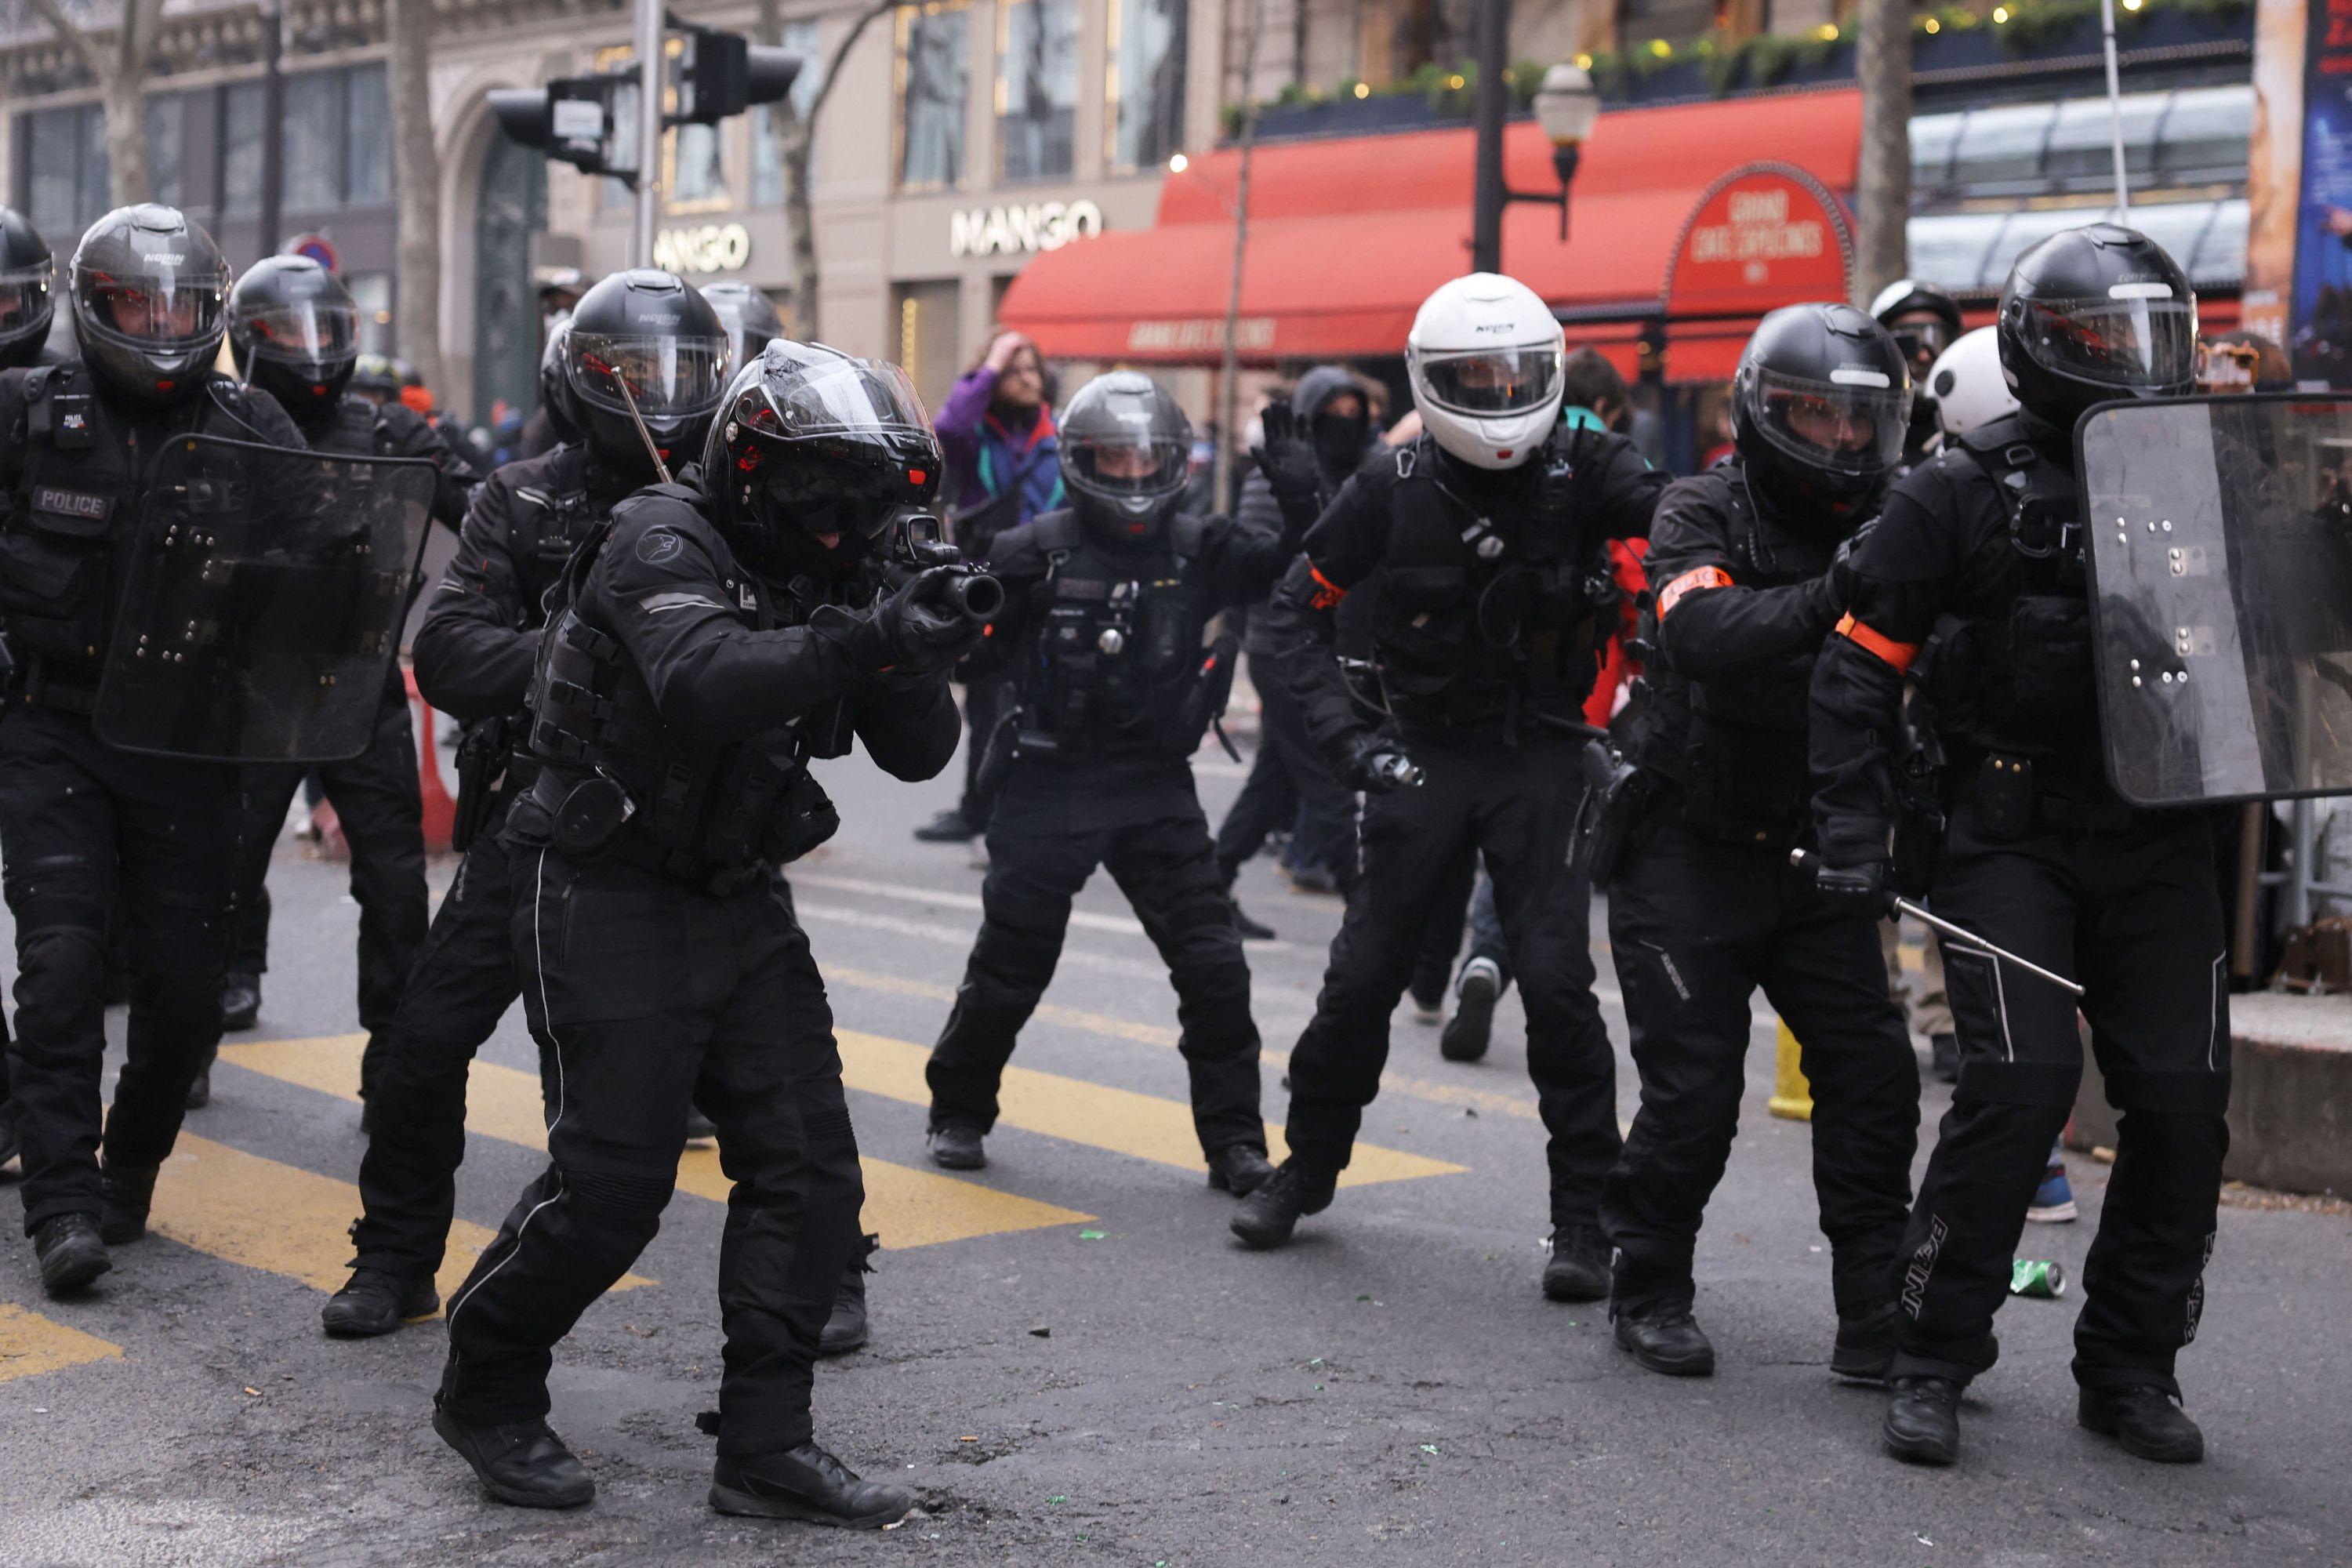 Mobilization of March 28: roughly the “same security device” as last Thursday planned in Paris, says Laurent Nuñez